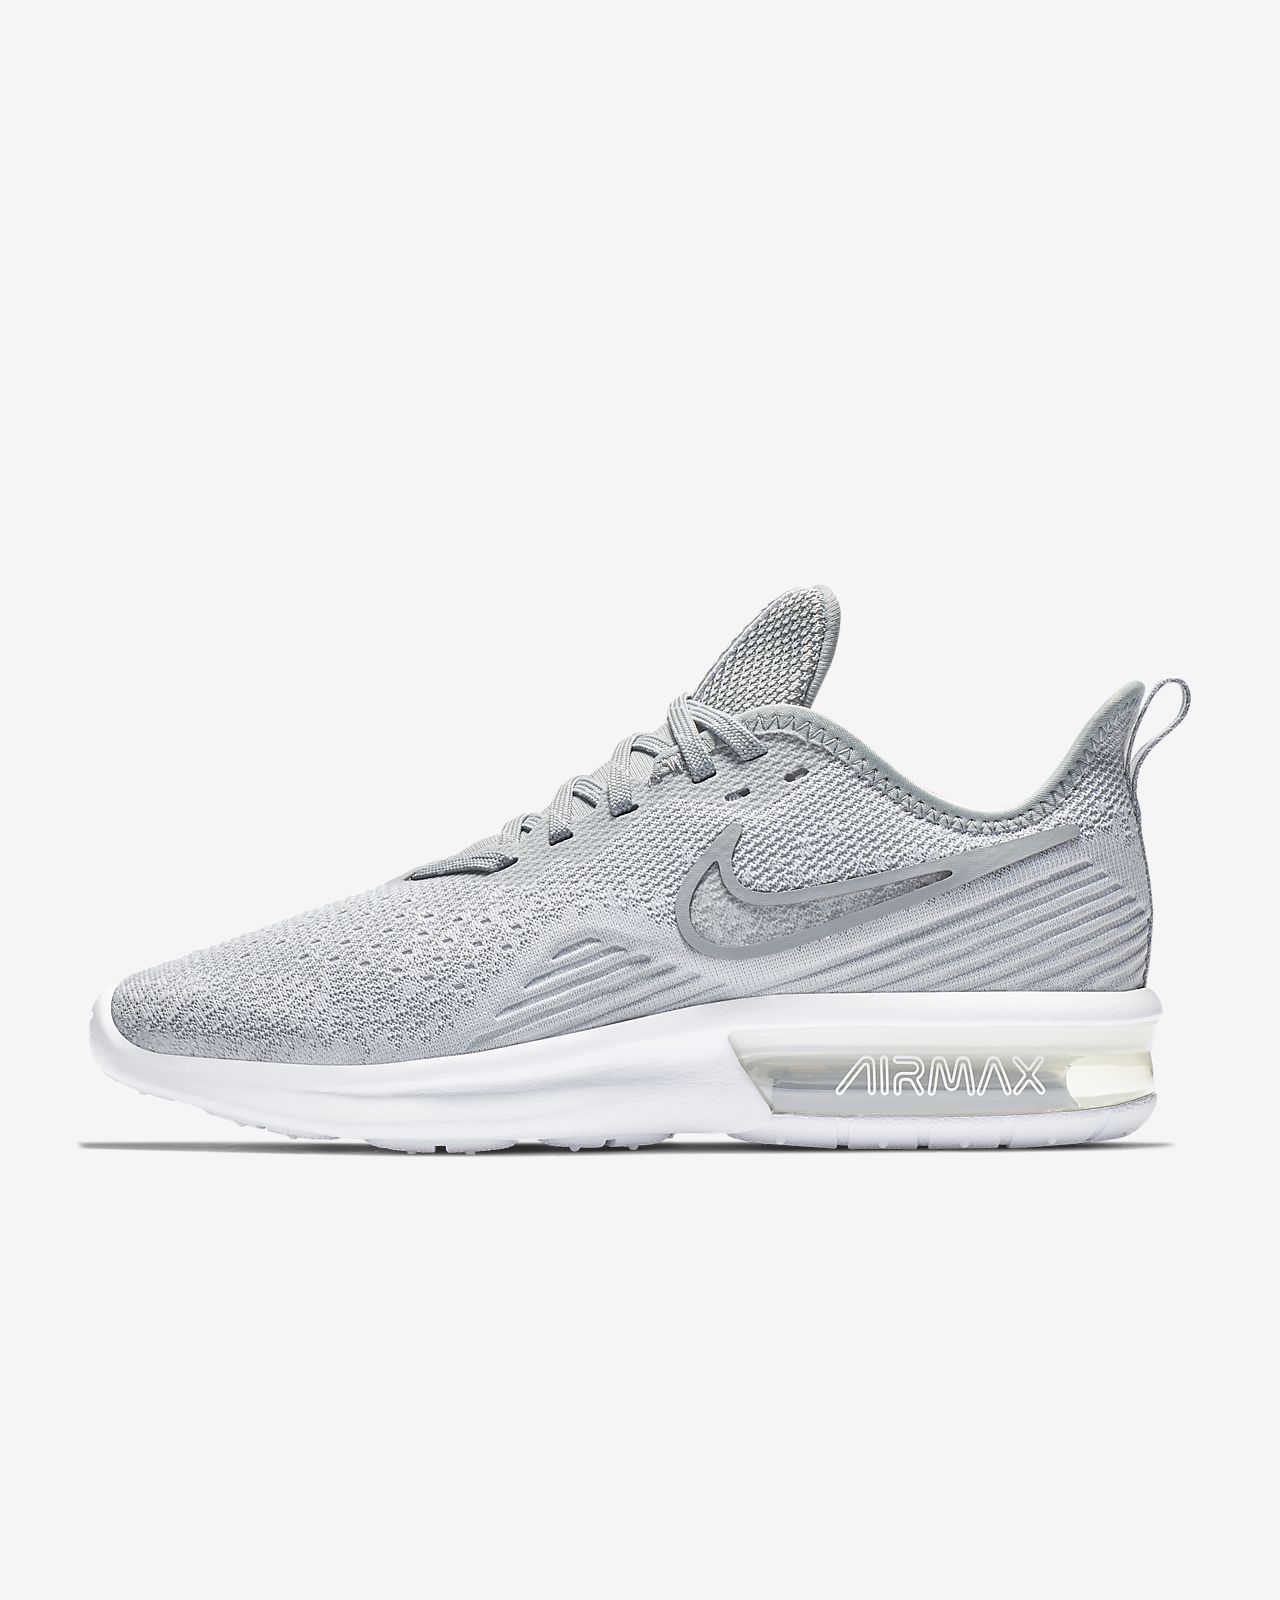 Nike Air Max Sequent 4 Women's Shoe